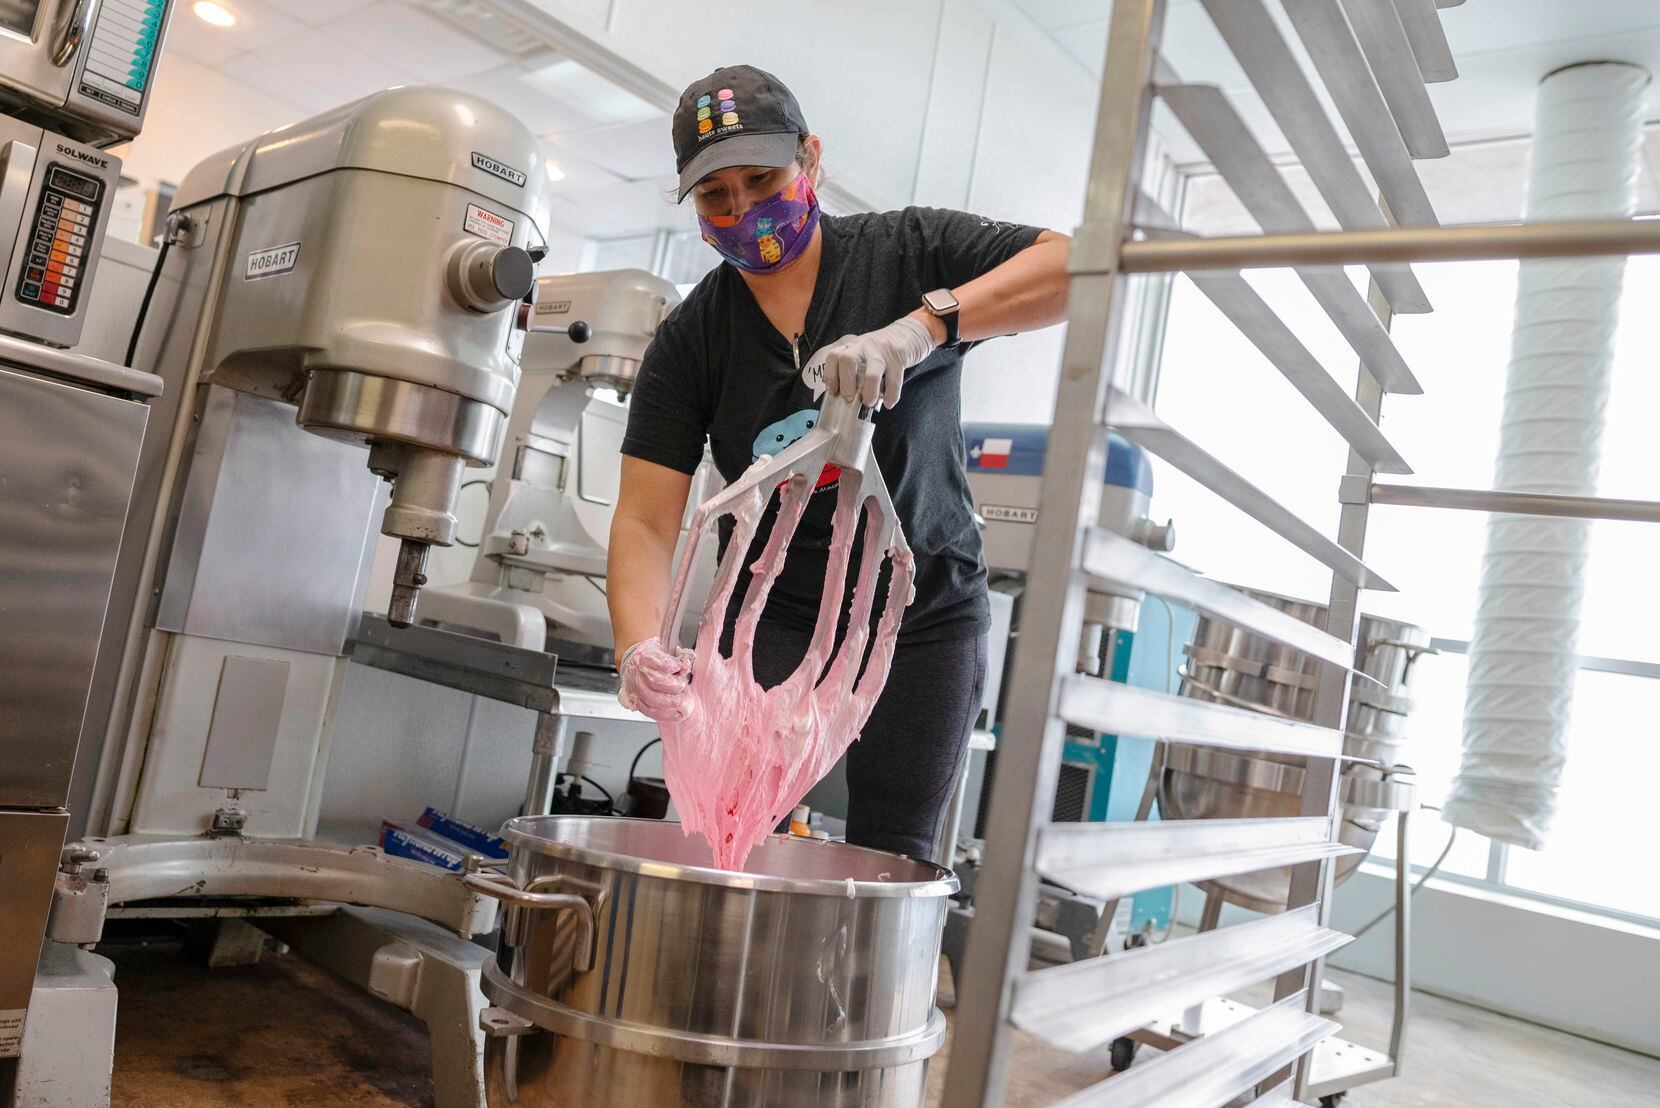 Owner and pastry chef Tida Pichakron mixes macaron batter in her kitchen at Haute Sweets Patisserie in Dallas.